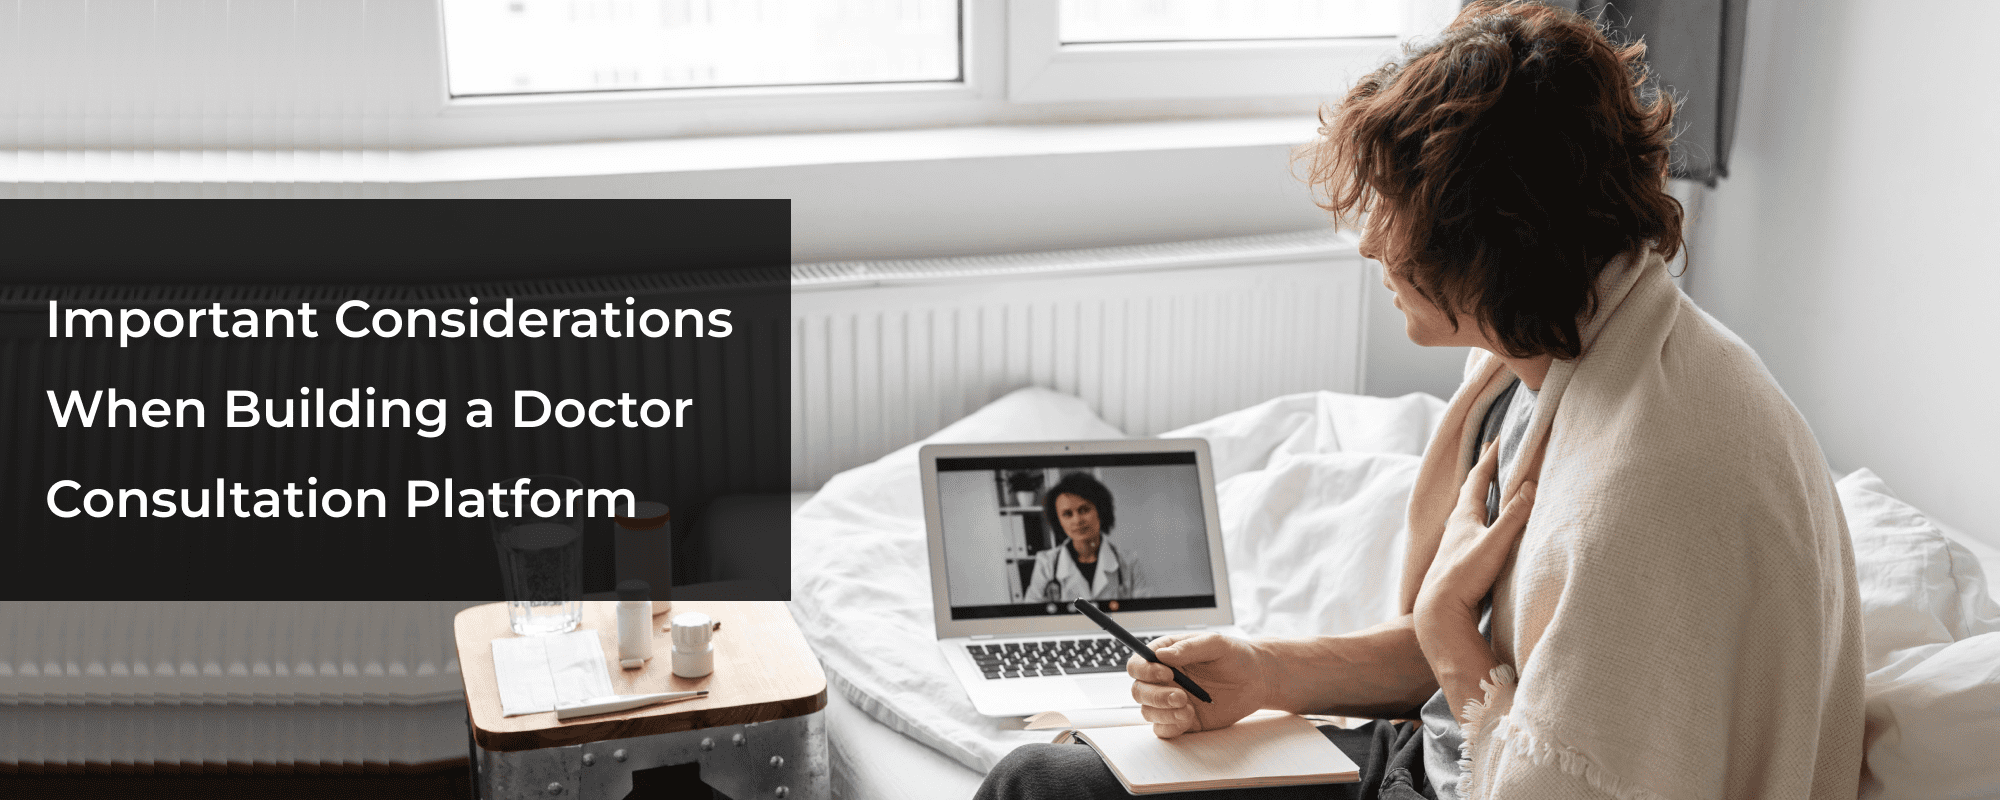 How to Build a Doctor Consultation Platform – Key Features & Business Model